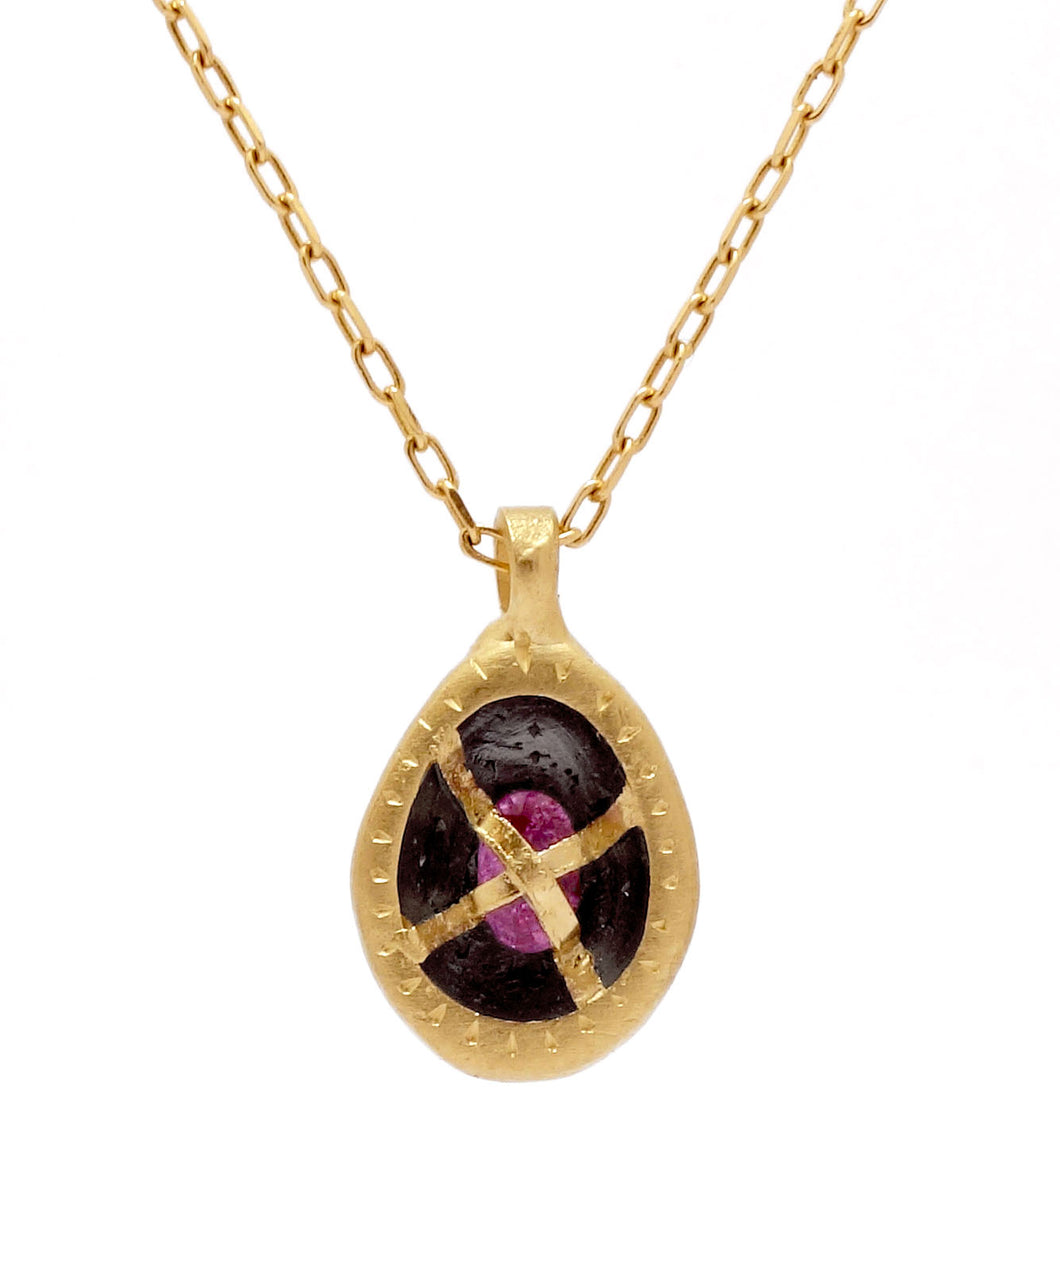 Fraser Hamilton Jewellery | 'Battle' Gold pendant with a bound pink sapphire